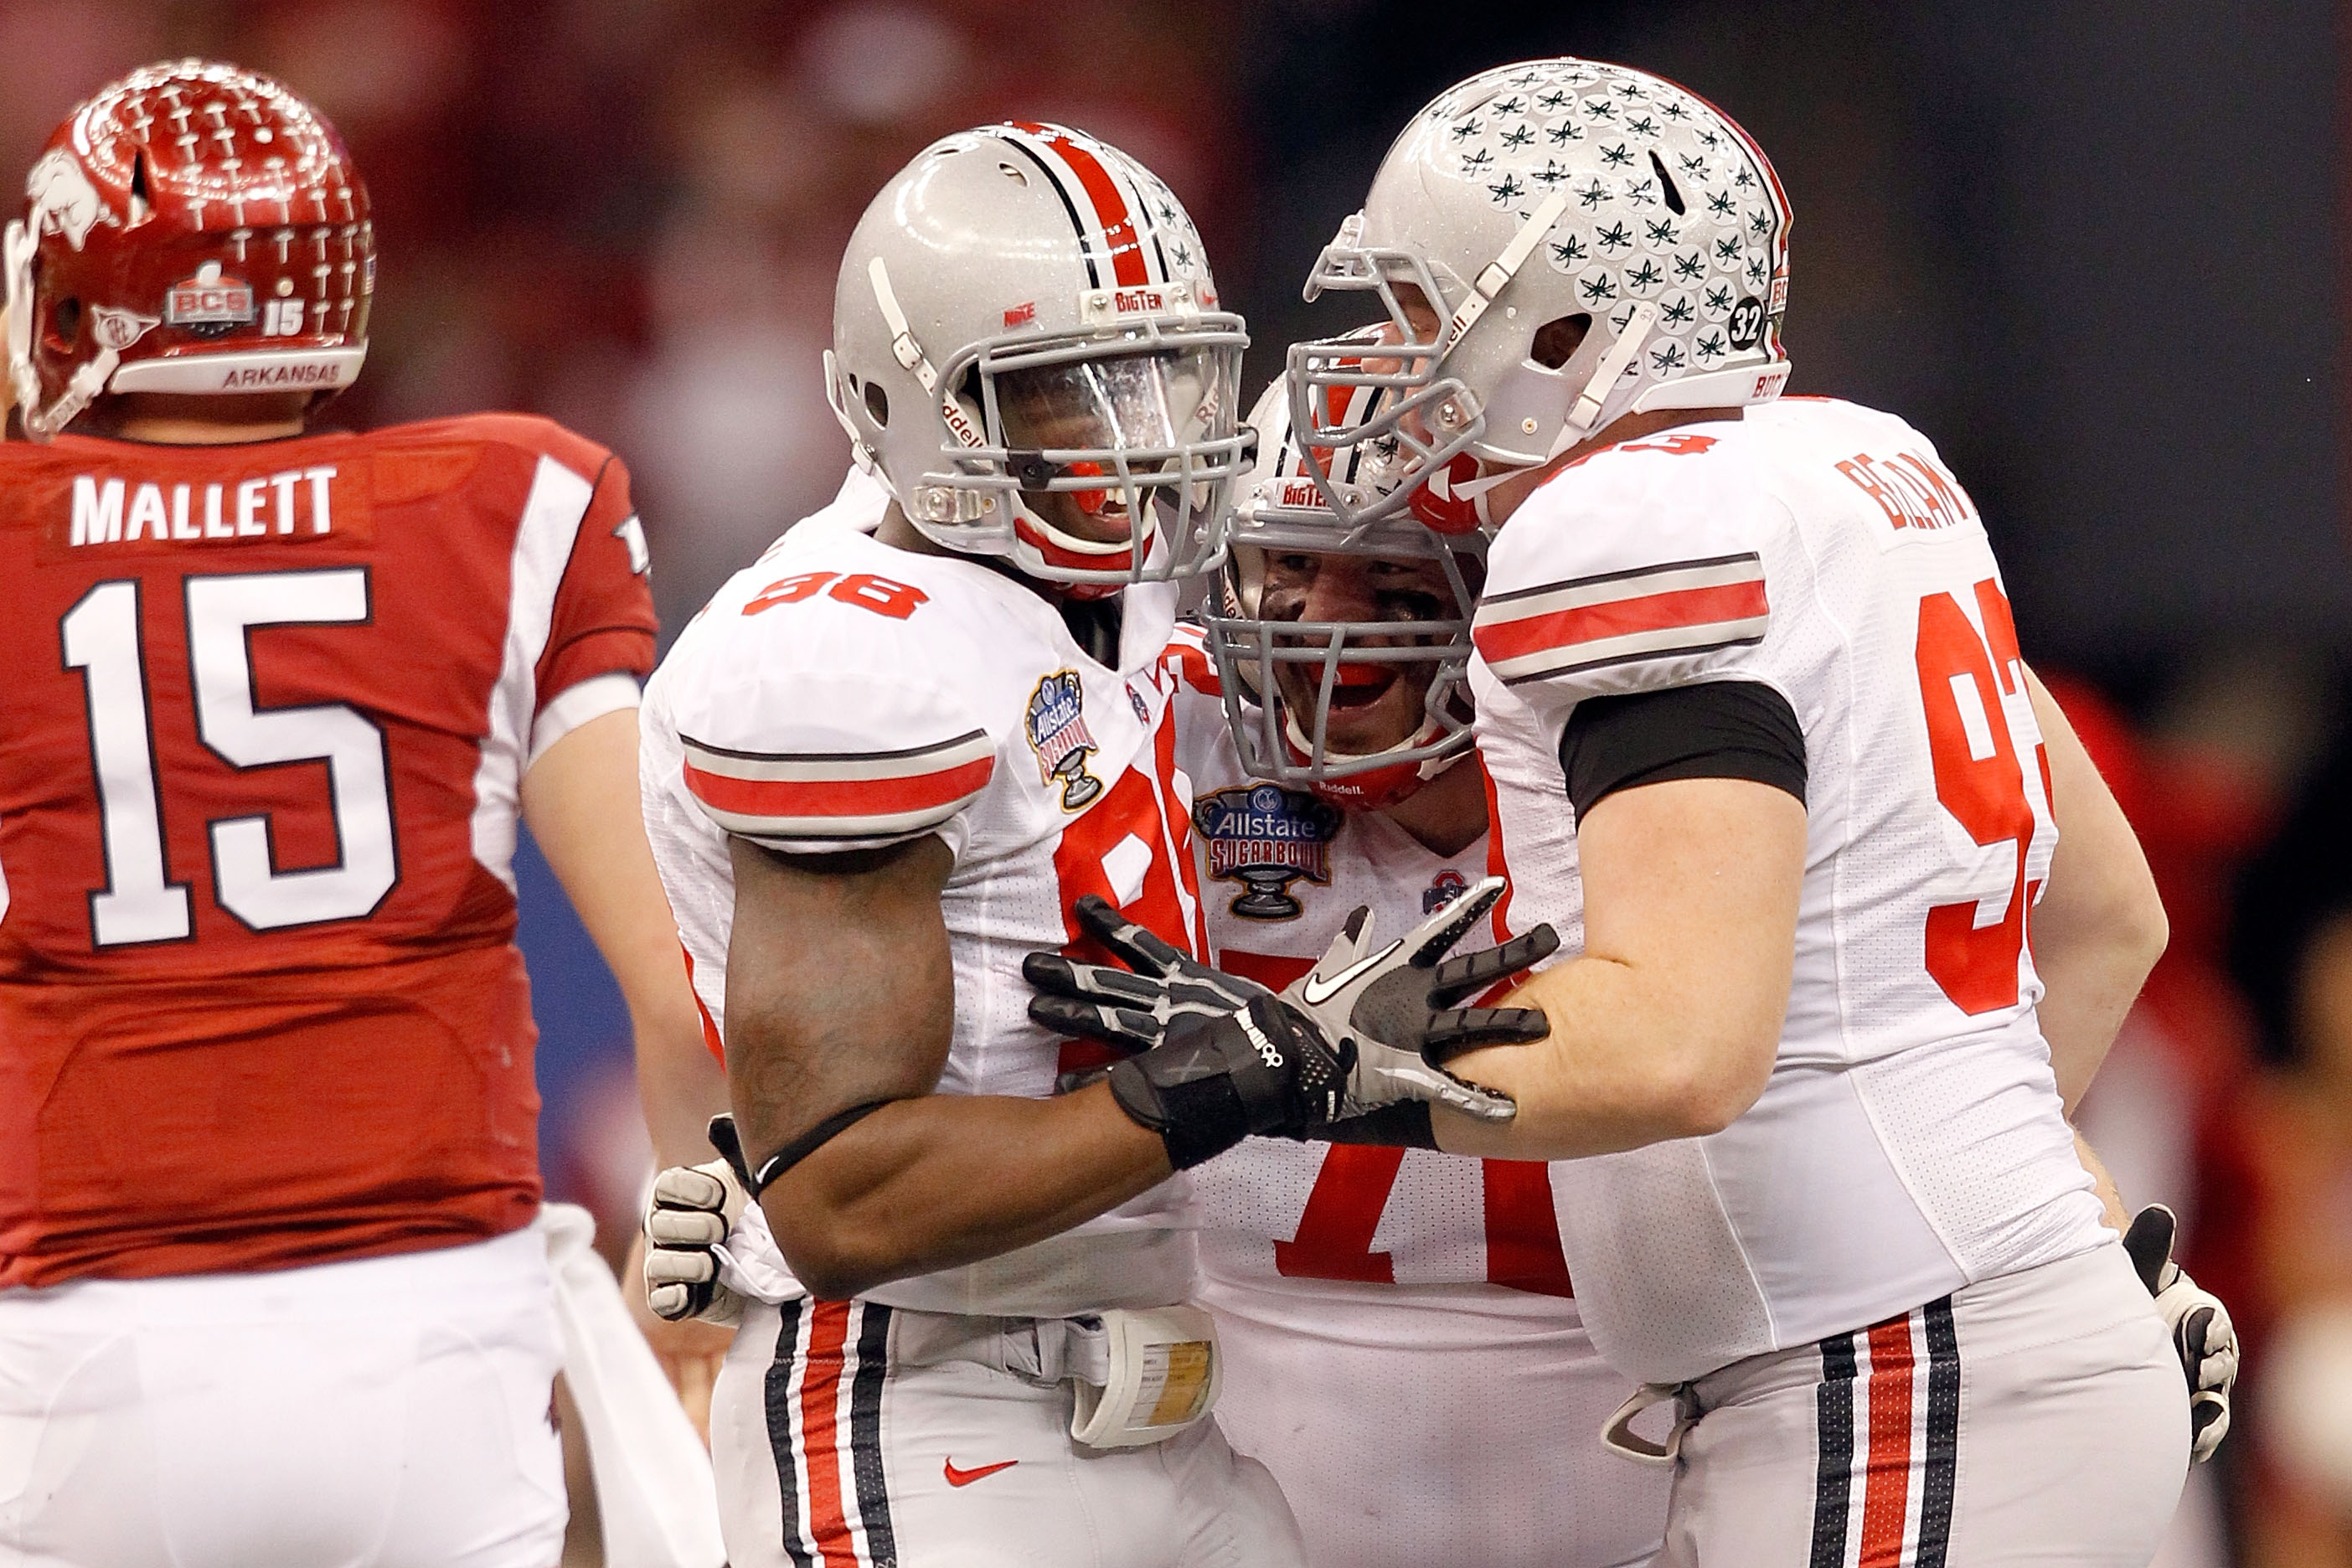 NEW ORLEANS, LA - JANUARY 04:  Dexter Larimore #72 of the Ohio State Buckeyes celebrates with teammates Solomon Thomas #98 and Adam Bellamy #93  after Larimore sacks Ryan Mallett #15 of the Arkansas Razorbacks in the second quarter during the Allstate Sug